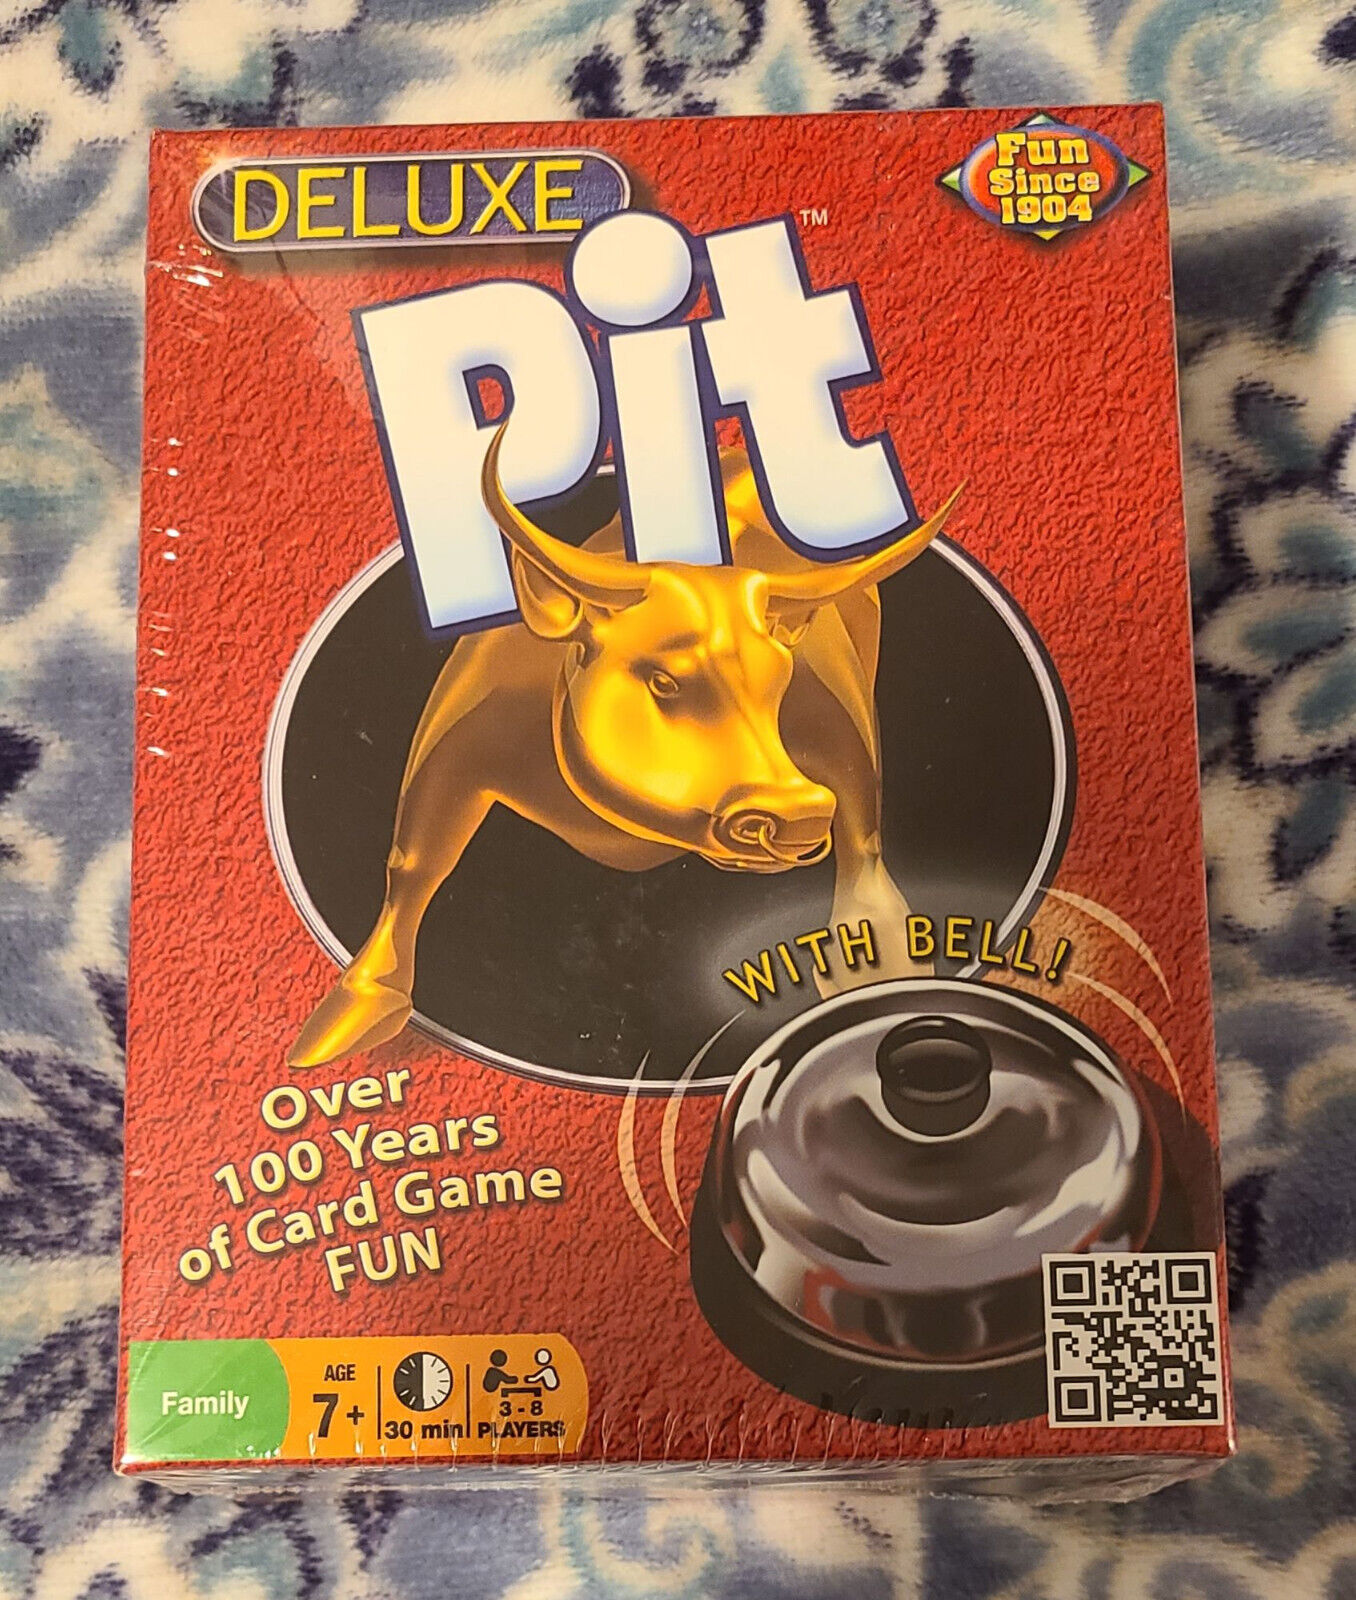 Deluxe Pit Hasbro Card Game With Bell New Ages 7 Years And Over & 3 to 8 Players